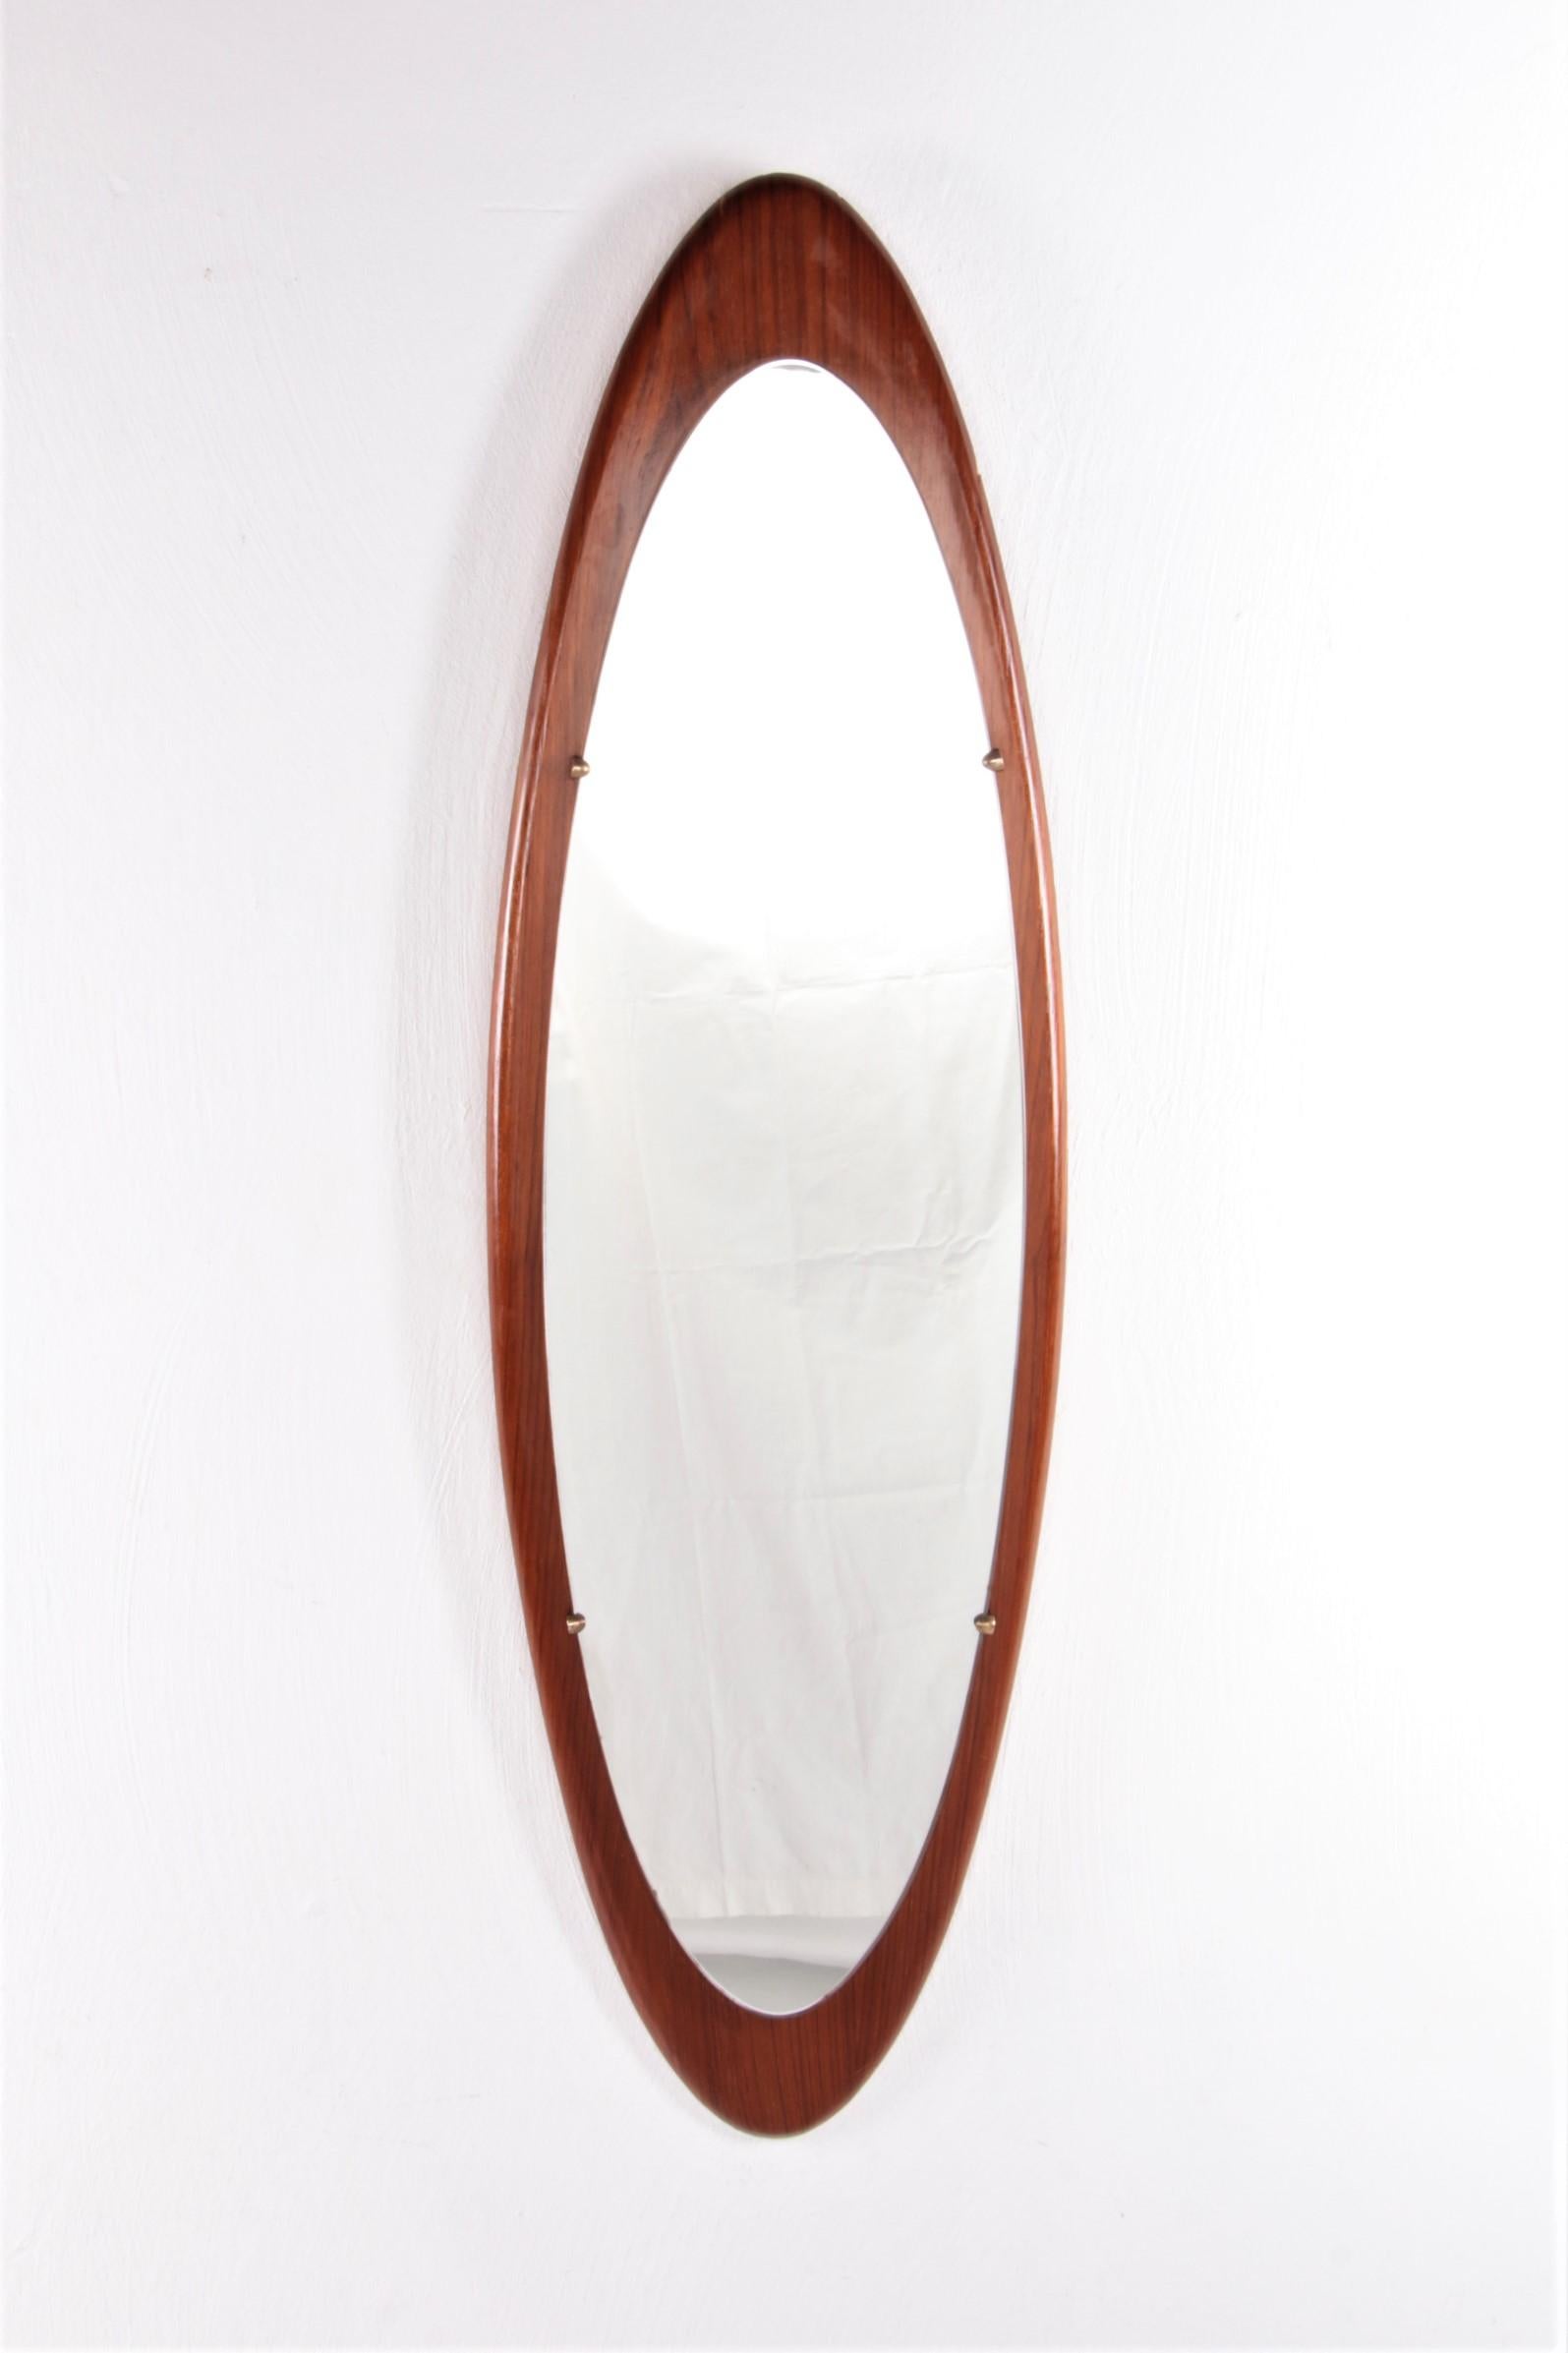 Mid-century teak mirror by Franco Campo & Carlo Graffi for Home, Italy 1960s.

This vintage mirror was designed by Franco Campo and Carlo Graffi and produced in Italy in the 1960s: it is in good condition with some traces of age and use.

This is a